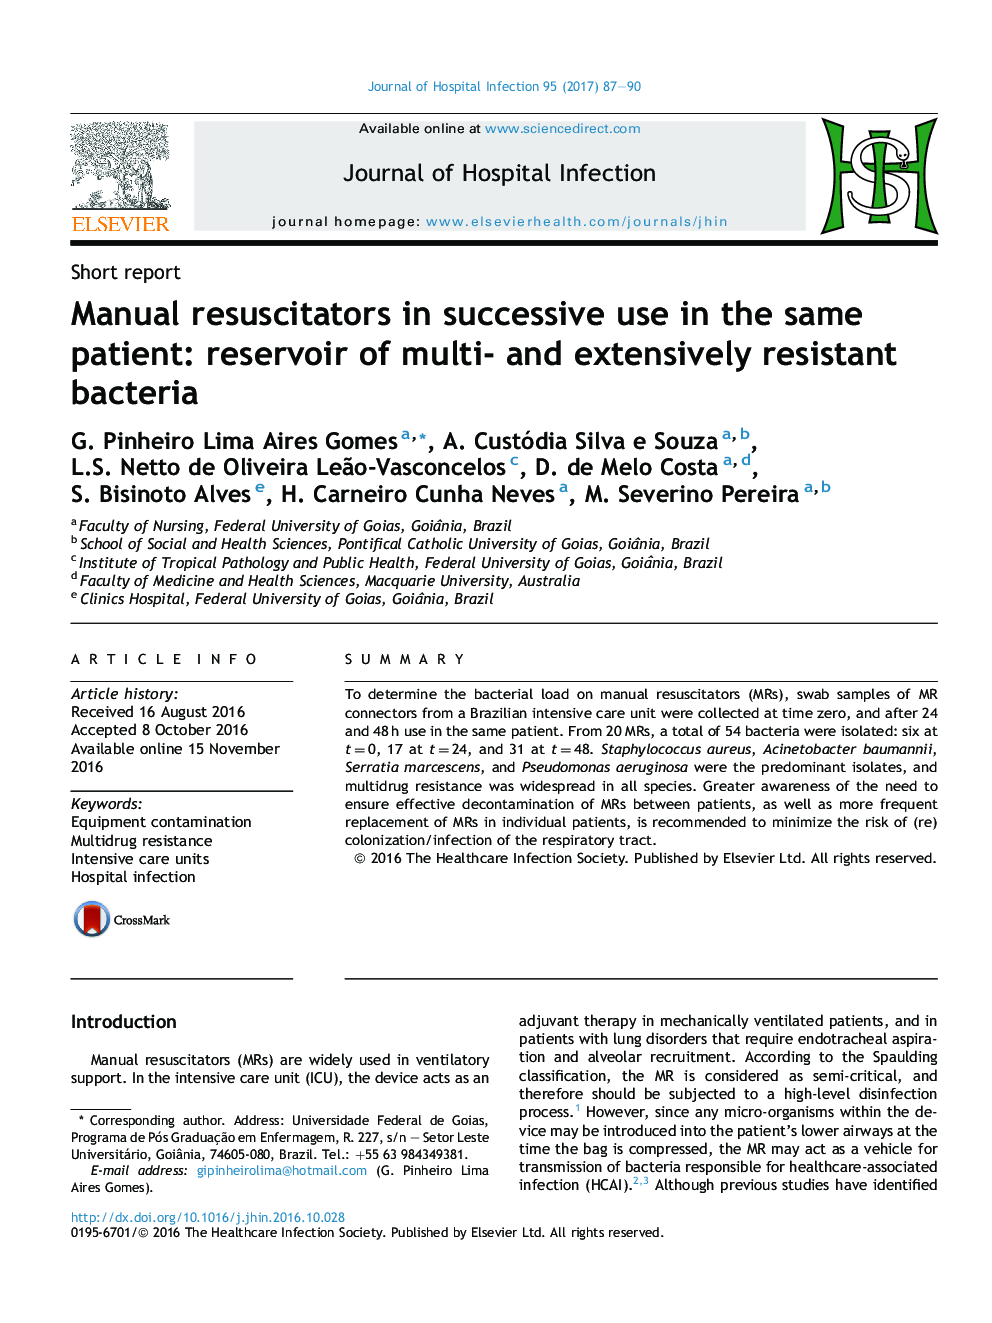 Manual resuscitators in successive use in the same patient: reservoir of multi- and extensively resistant bacteria